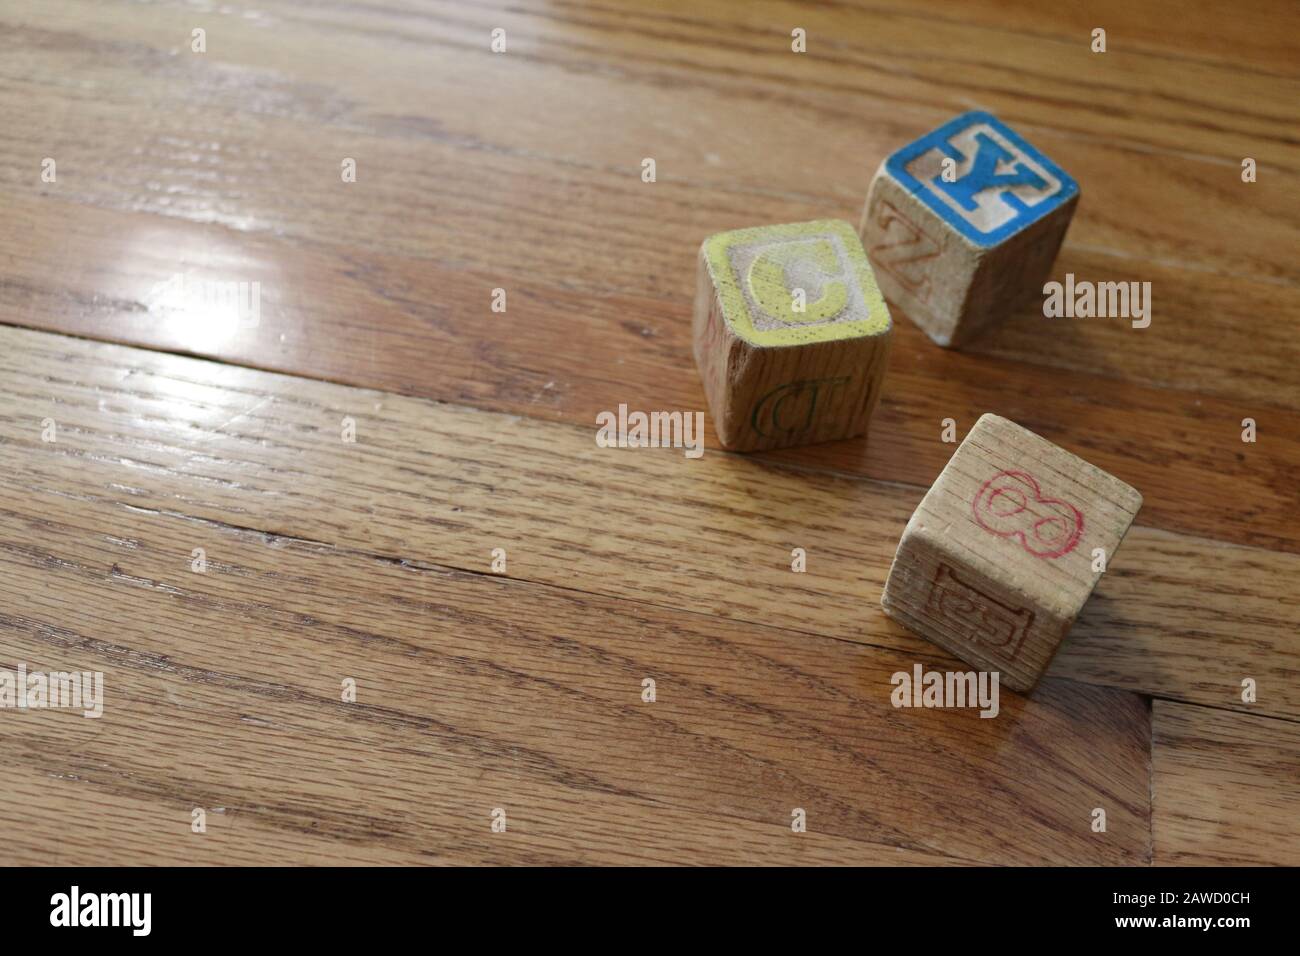 Three Old Wooden Colorful Alphabet Number Blocks on wood floor in natural light Stock Photo